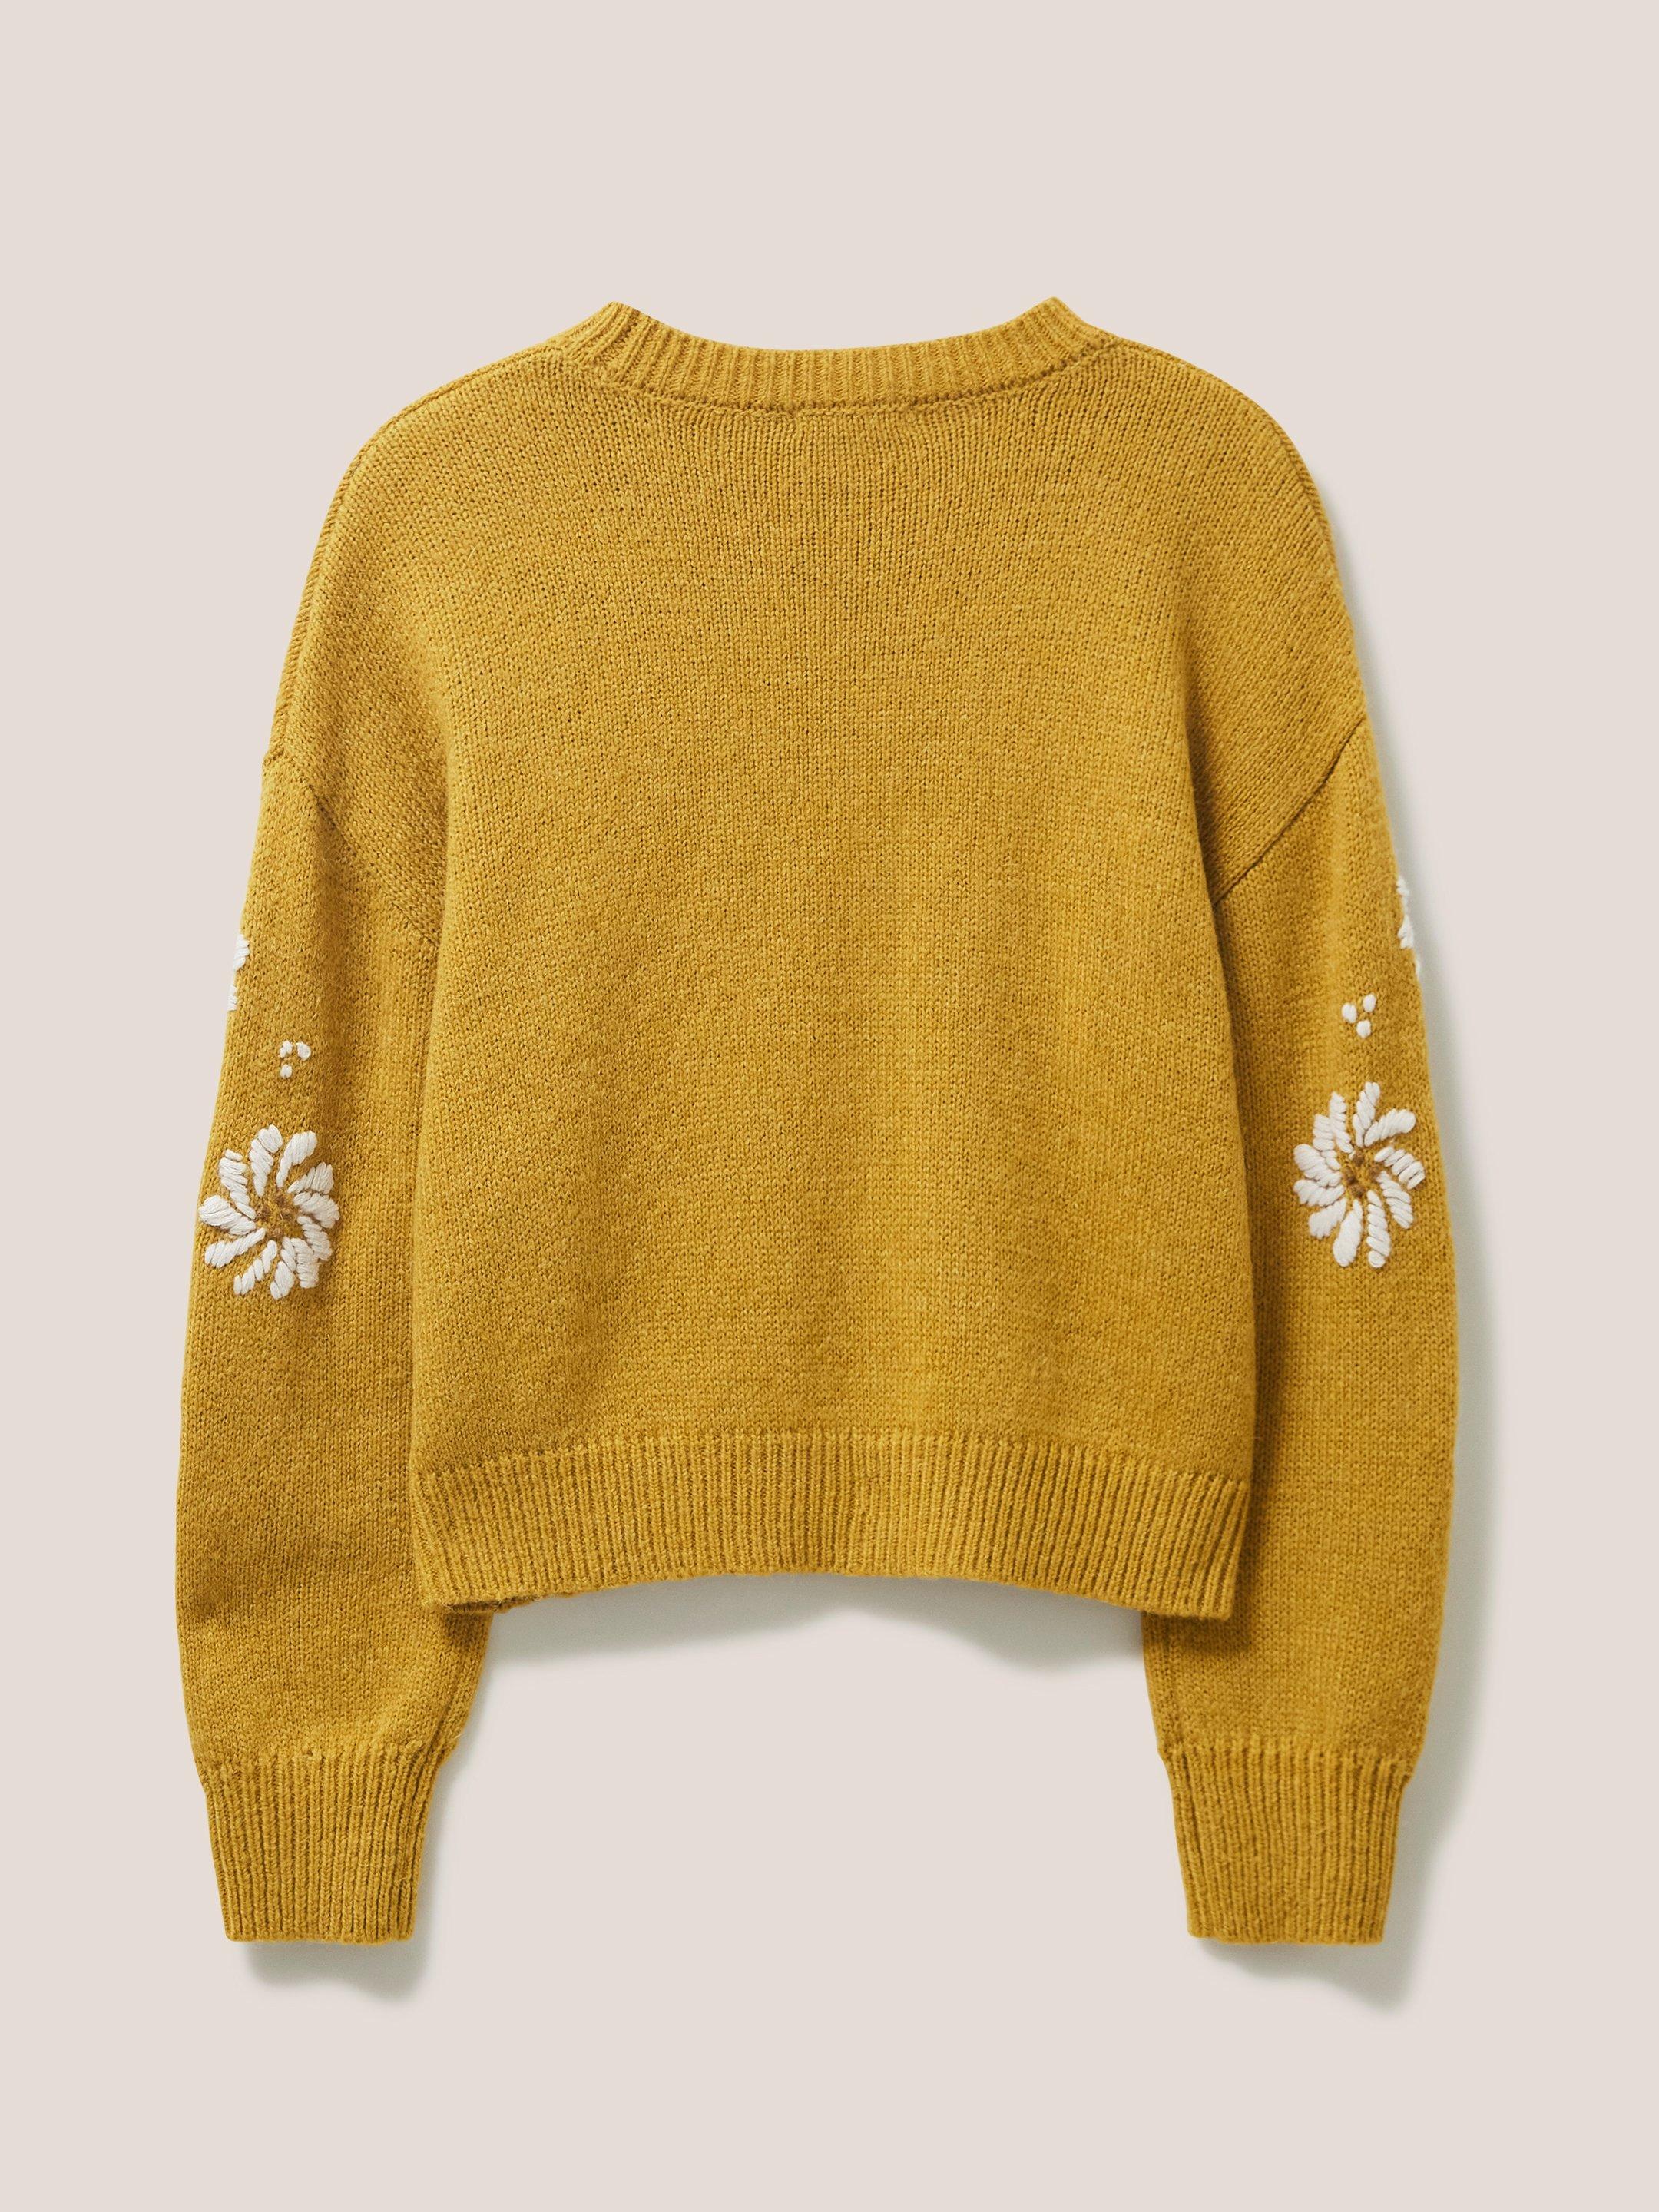 Carousel Embroidered Jumper in DP YELLOW - FLAT BACK